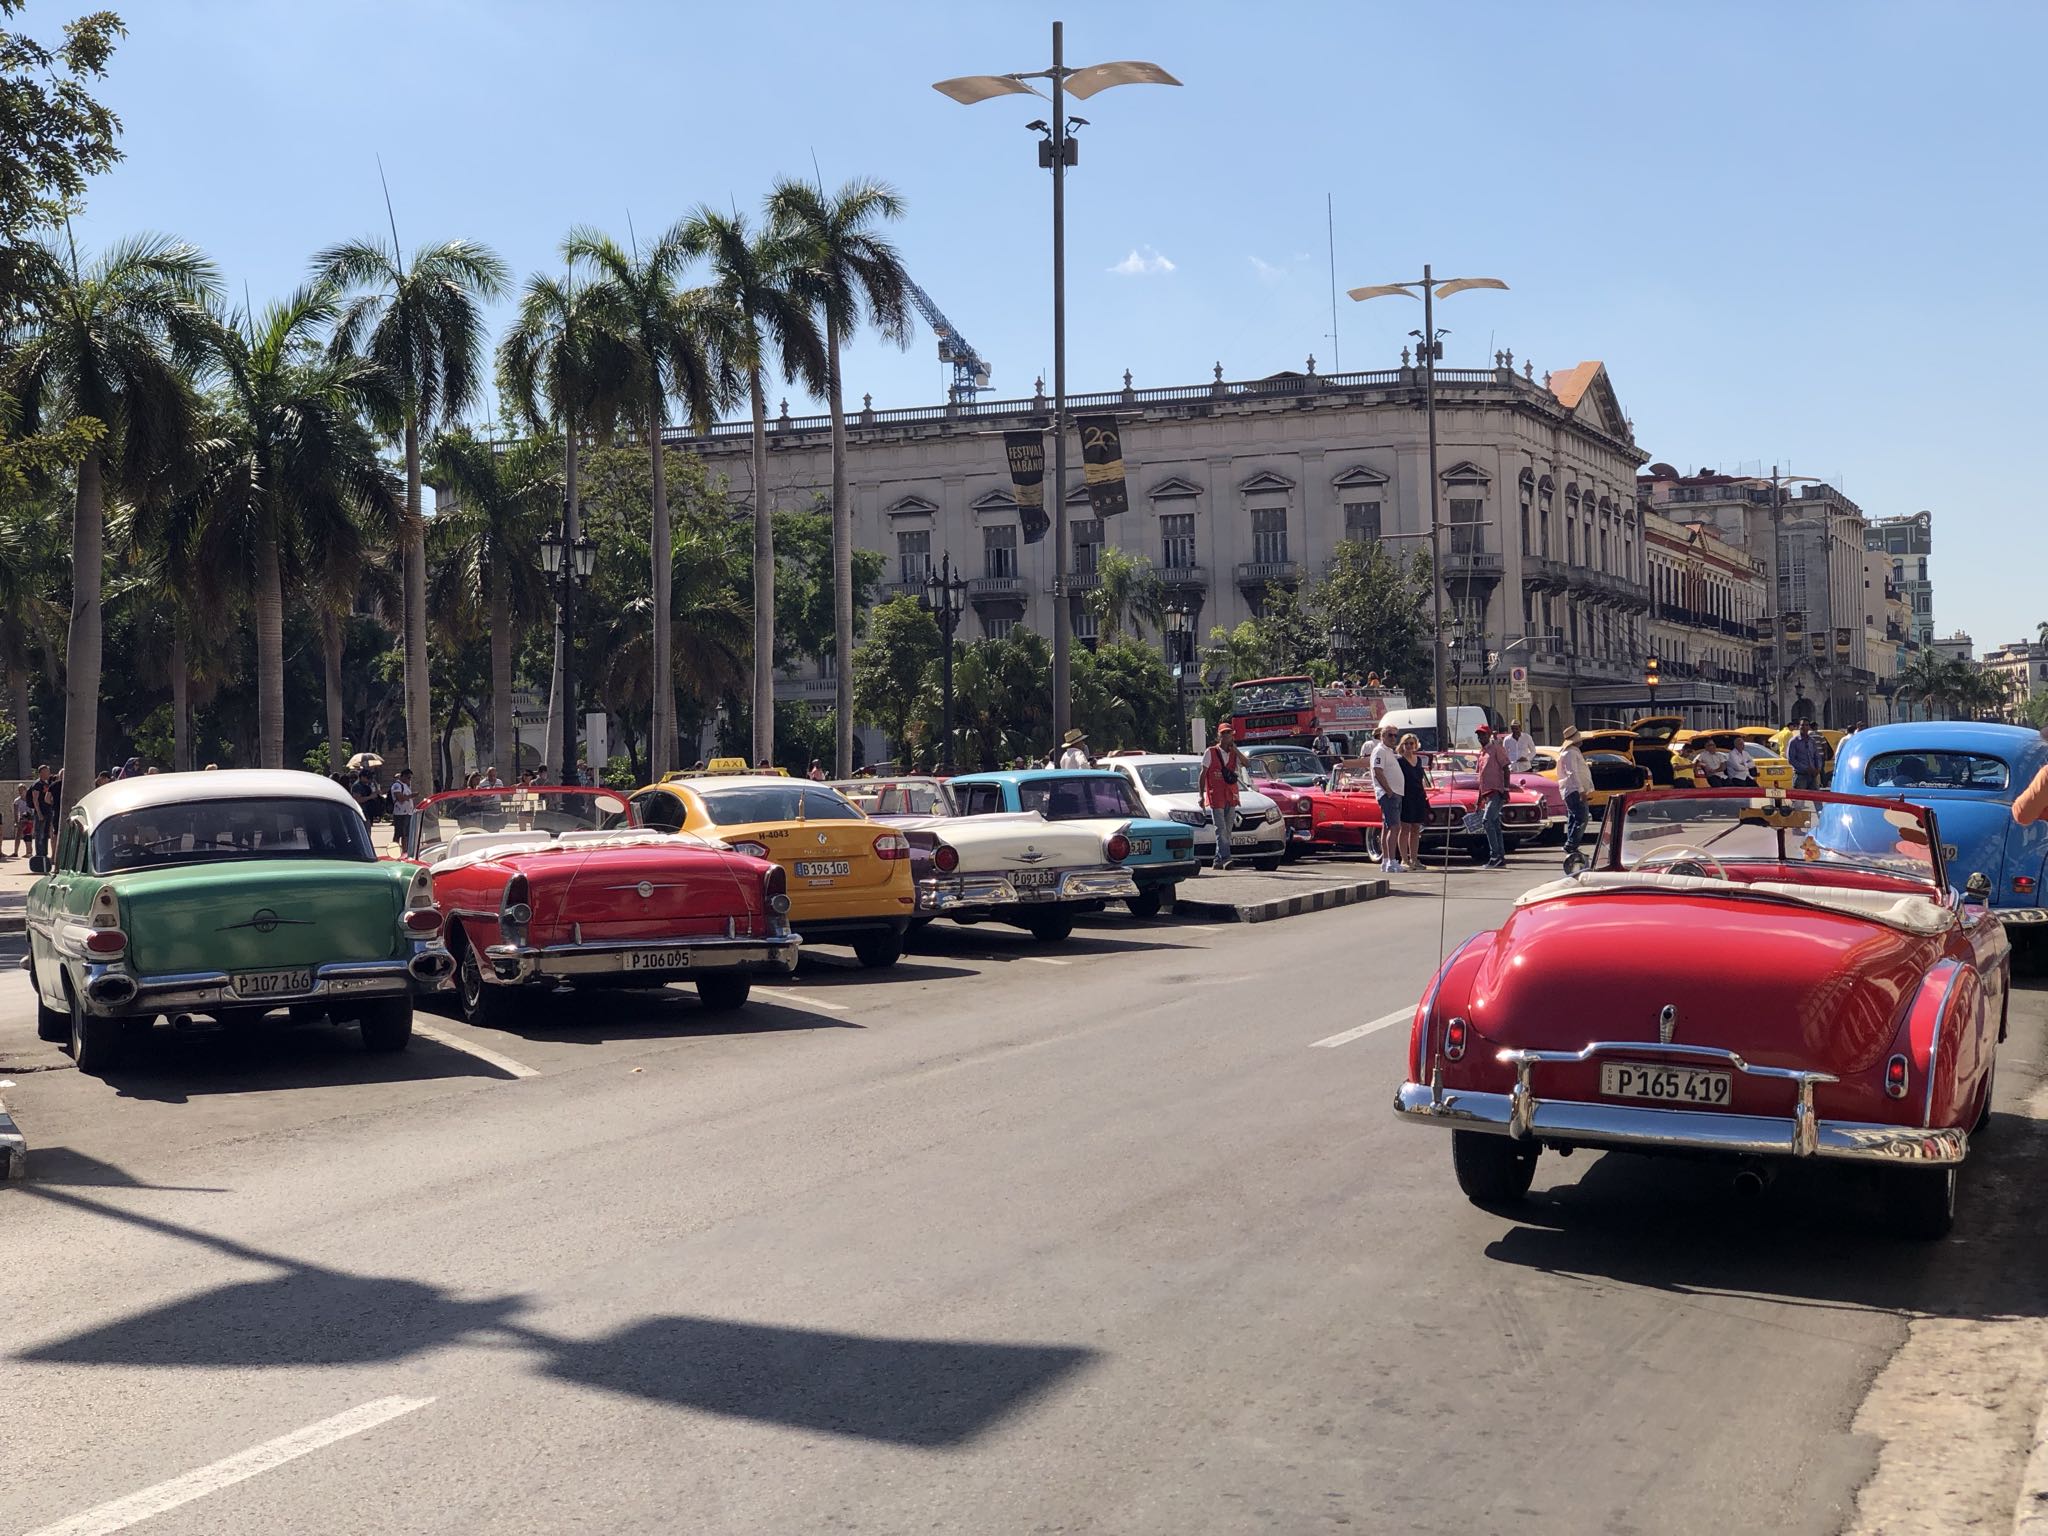 Photo 8 of 221 from the album Highlights Cuba 2019.